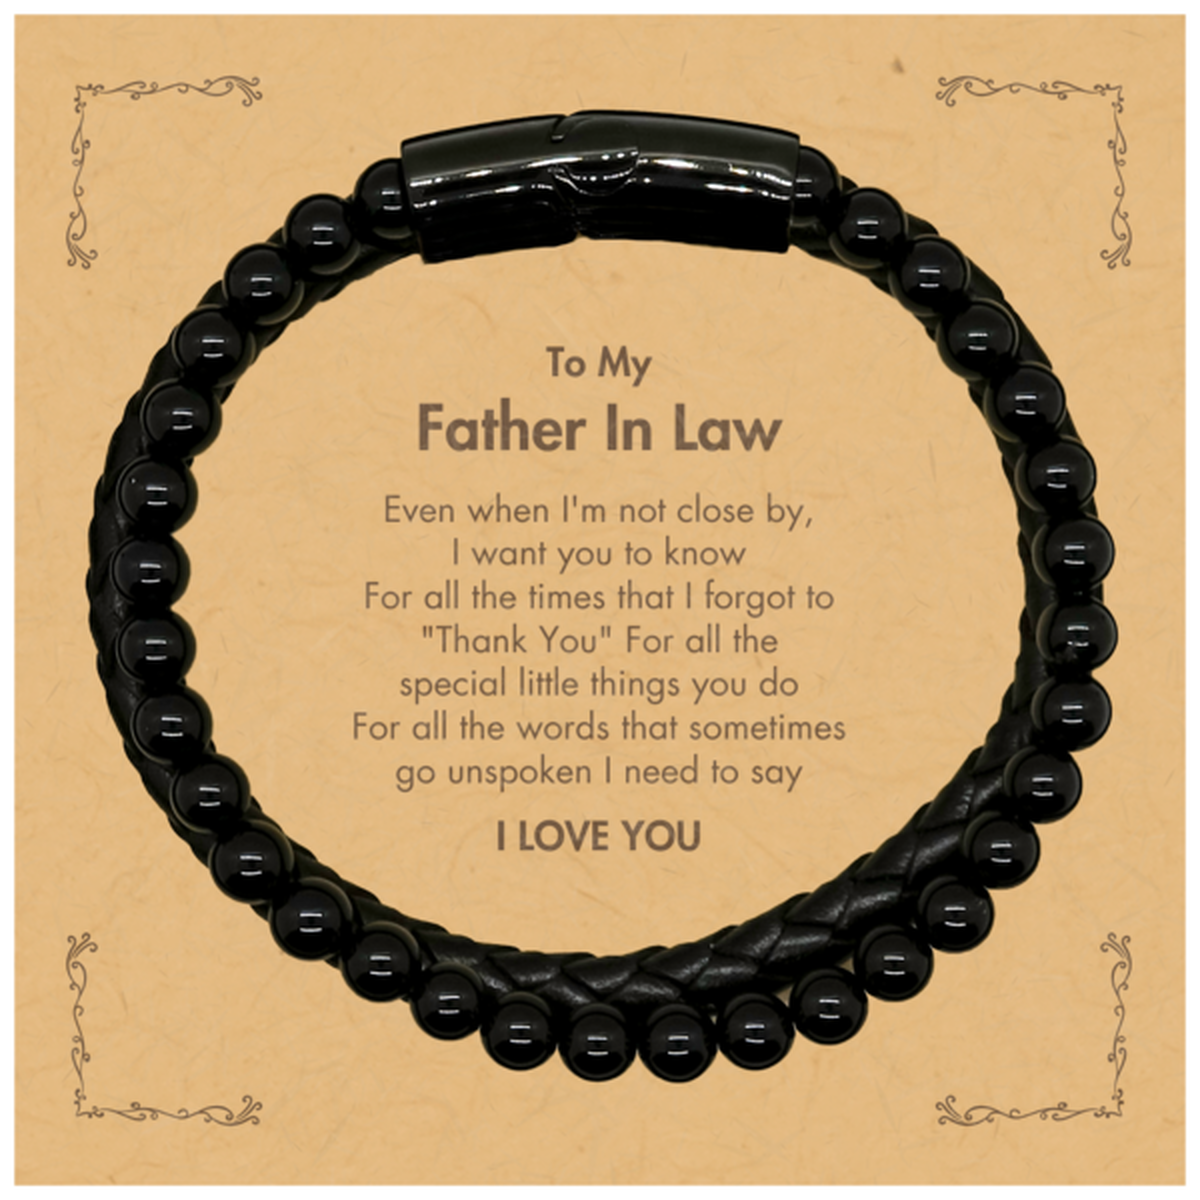 Thank You Gifts for Father In Law, Keepsake Stone Leather Bracelets Gifts for Father In Law Birthday Mother's day Father's Day Father In Law For all the words That sometimes go unspoken I need to say I LOVE YOU